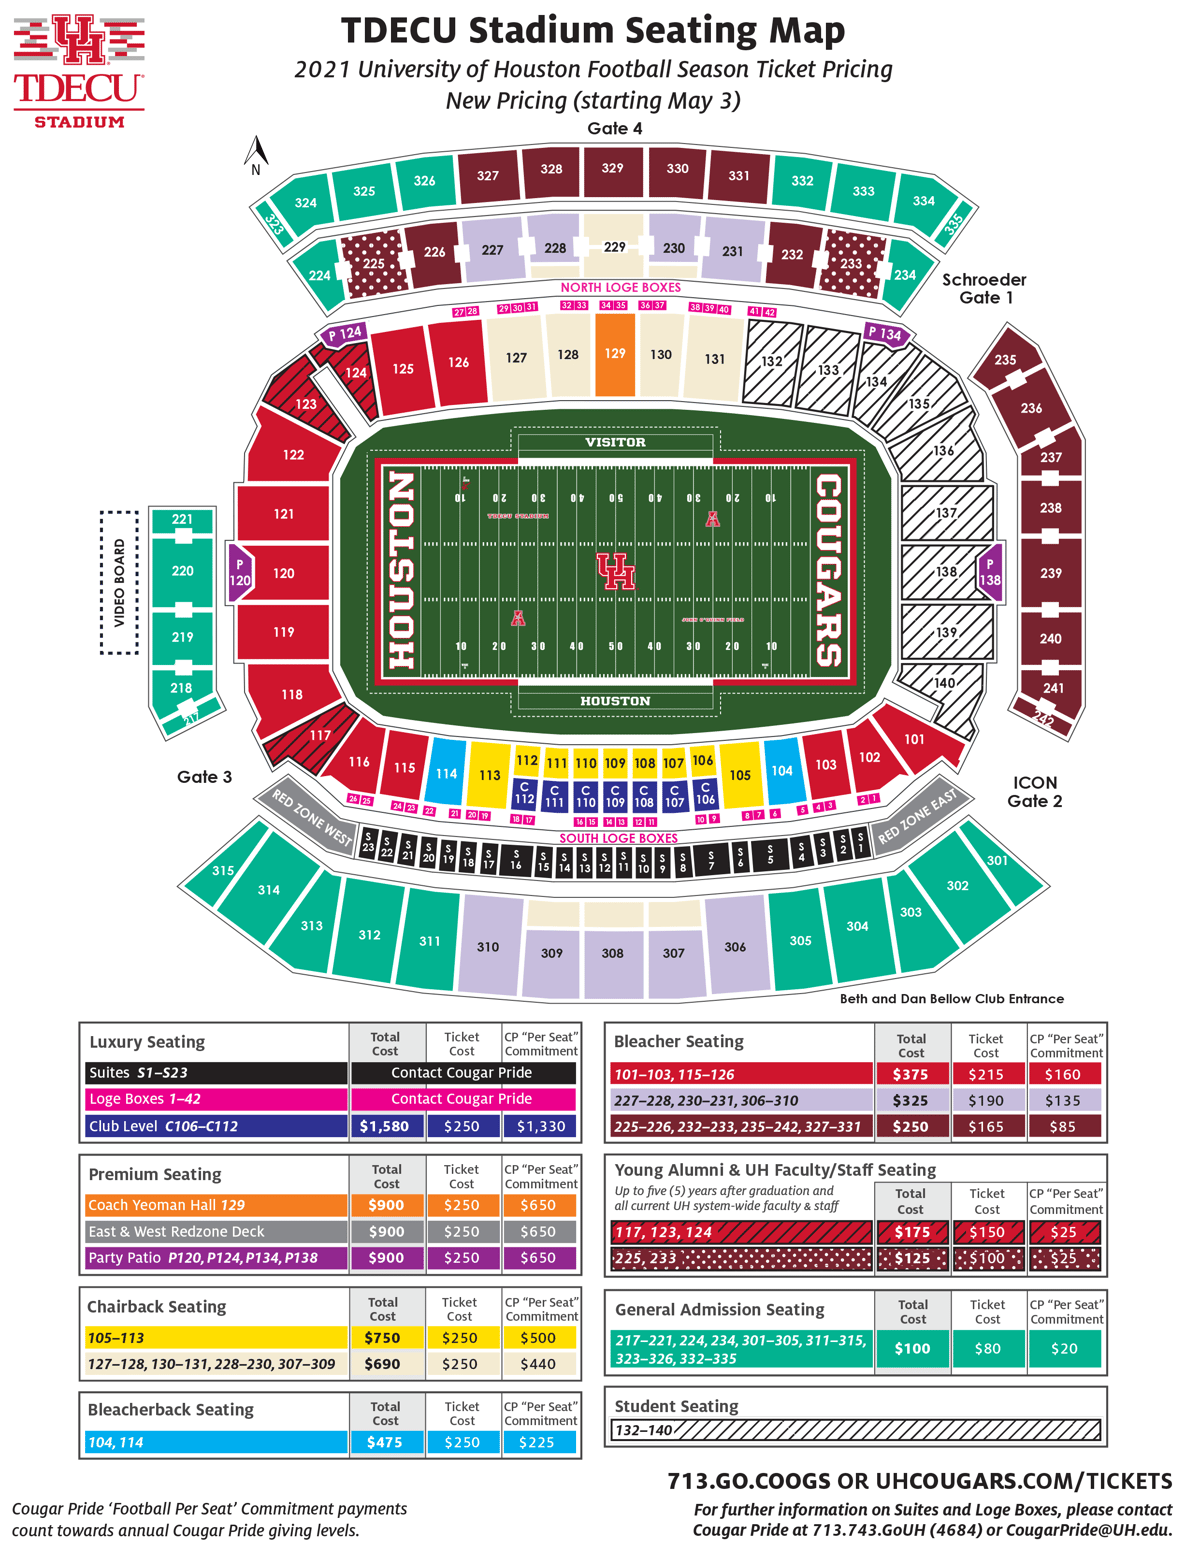 How To Find The Cheapest Houston Cougars Football Tickets + Face Value